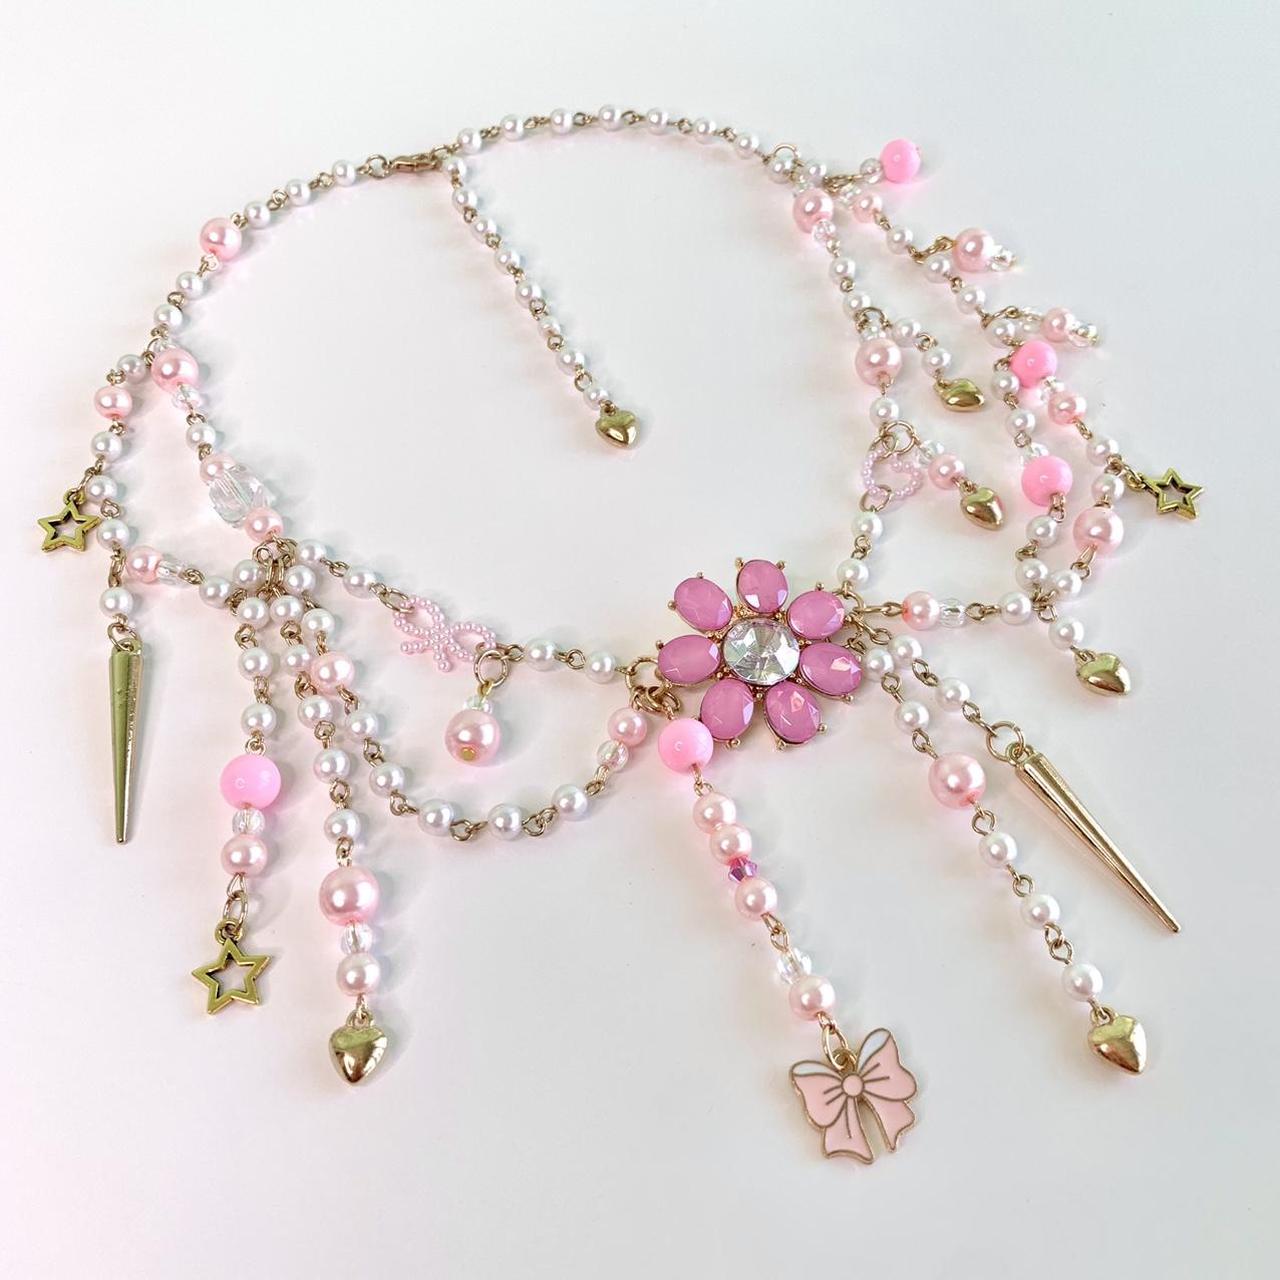 Sugarpill Women's Pink and Gold Jewellery (2)